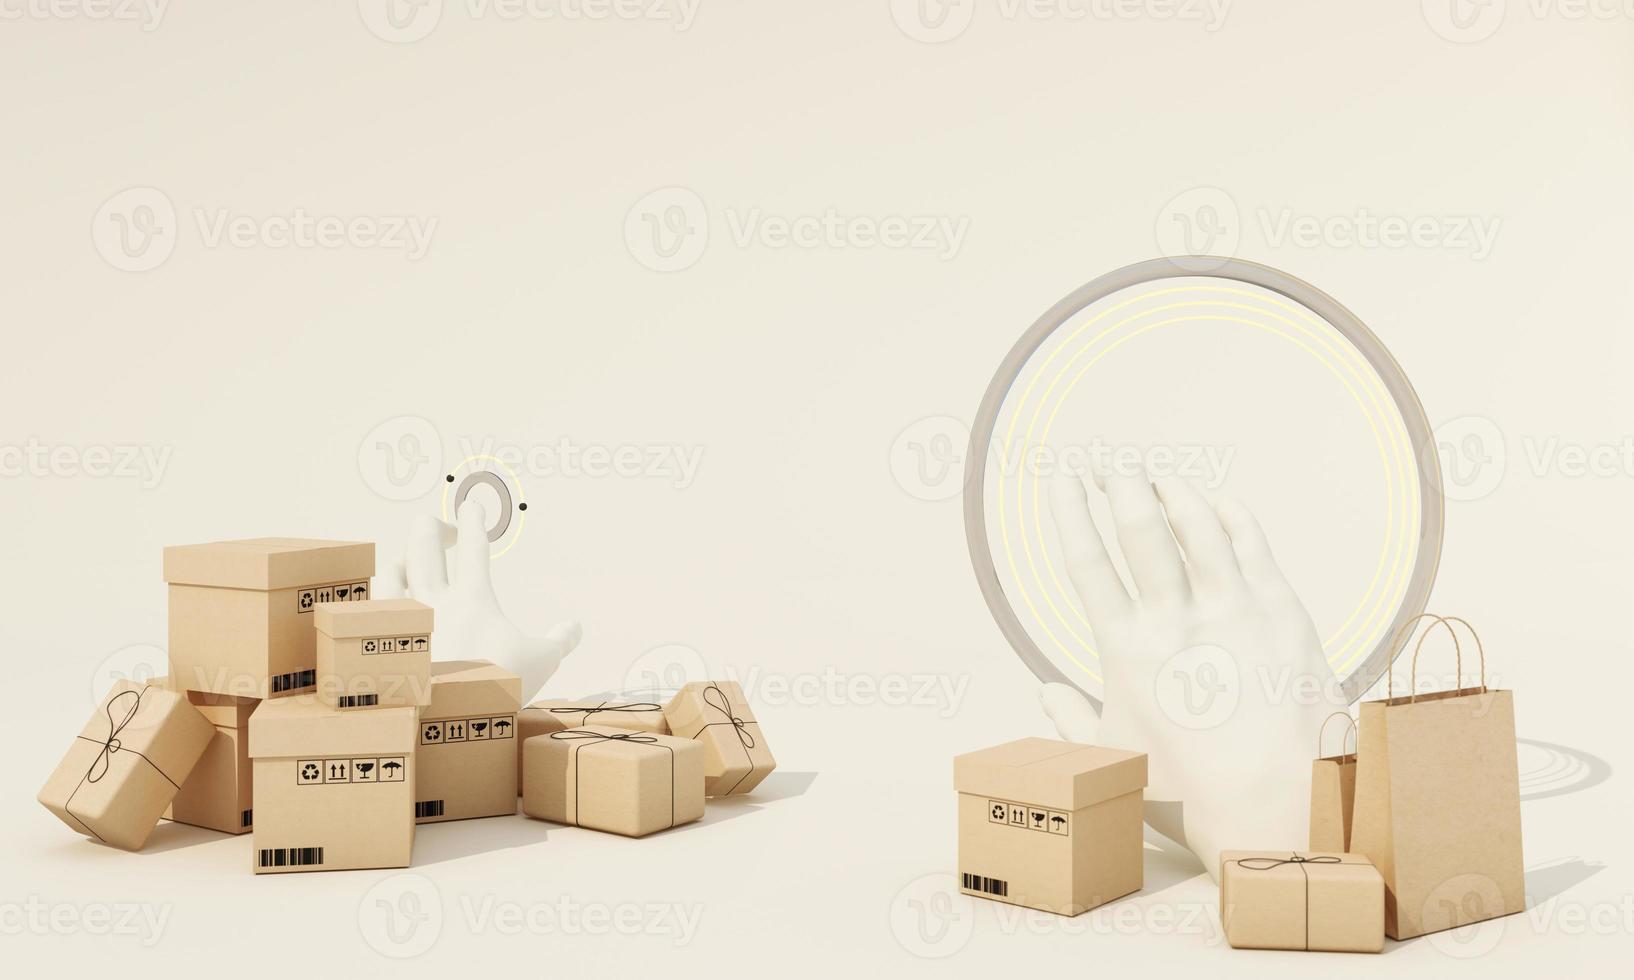 point of view of Shopping Online by using the hand to control the simulation button with parcel box, shopping bag cardboard box and payment via credit card isolate white background realistic 3d render photo